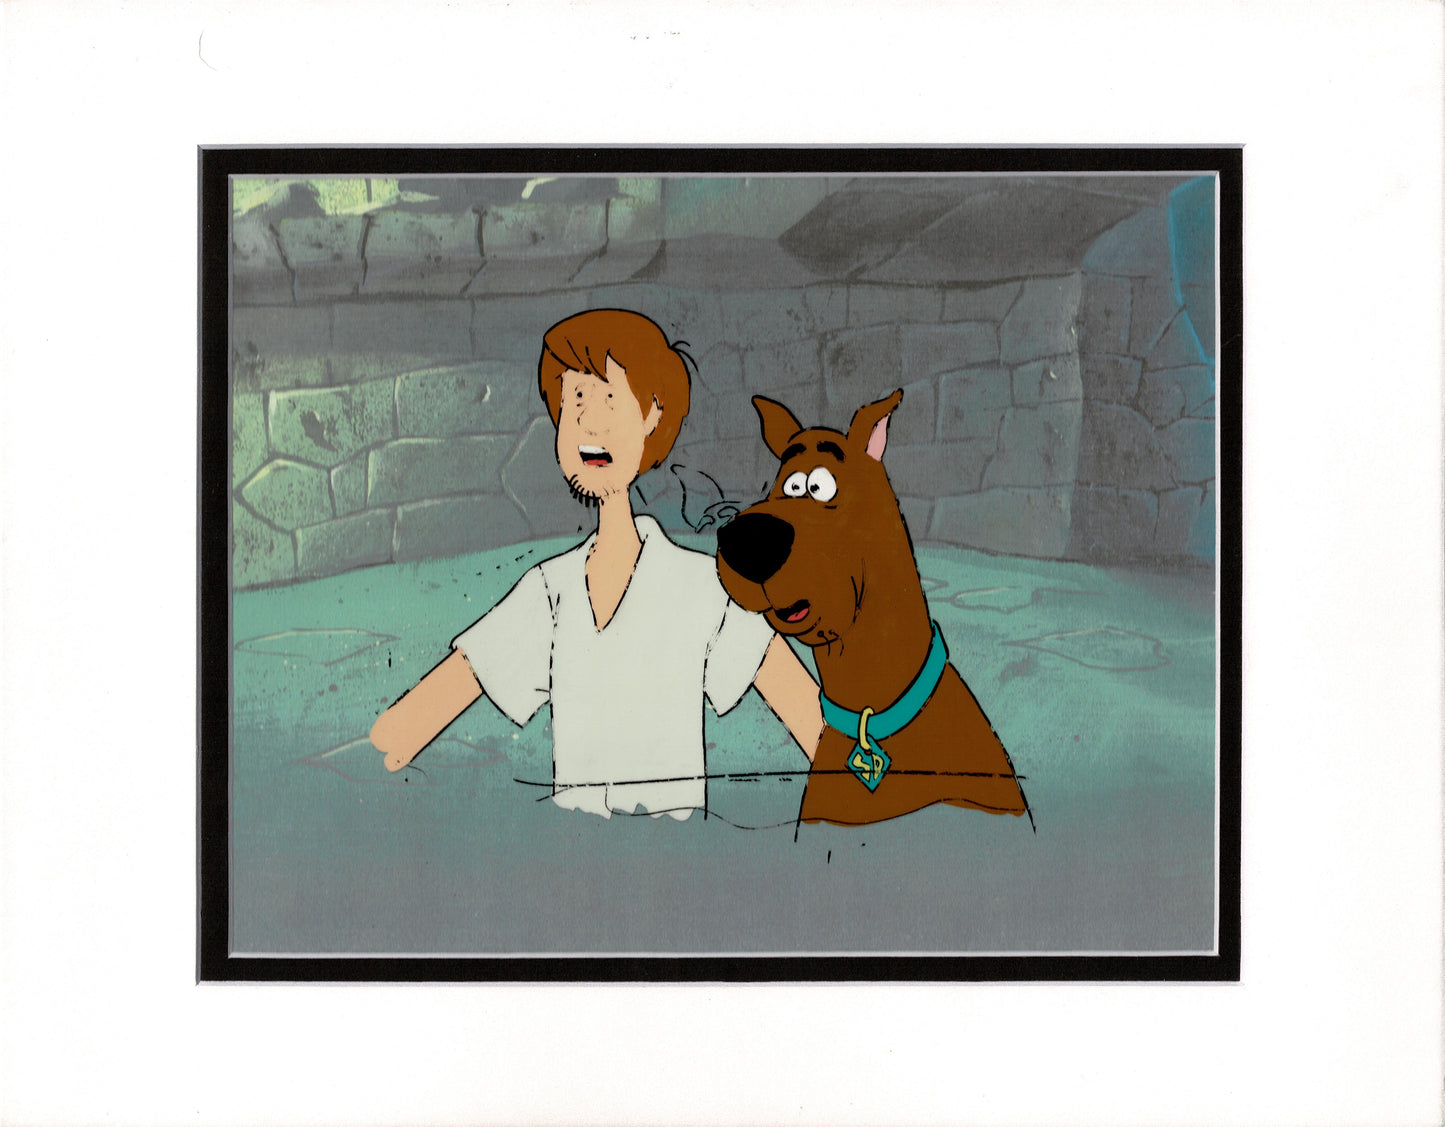 Scooby Doo New Movies 1972 Production Animation Cel from Hanna Barbera Anime 7m